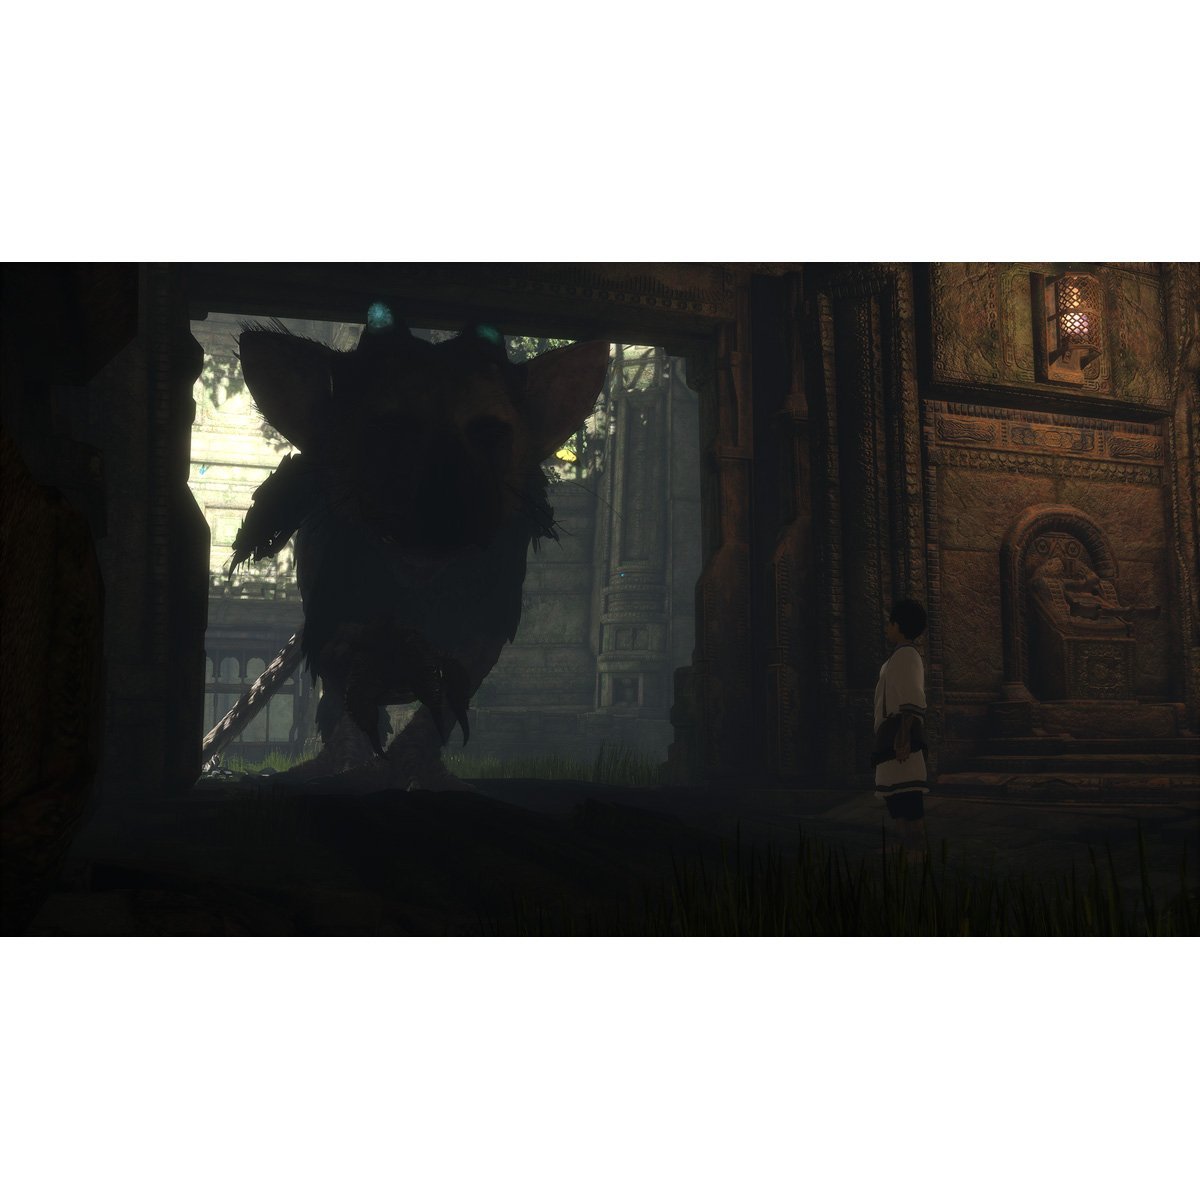 Ps4 The Last Guardian